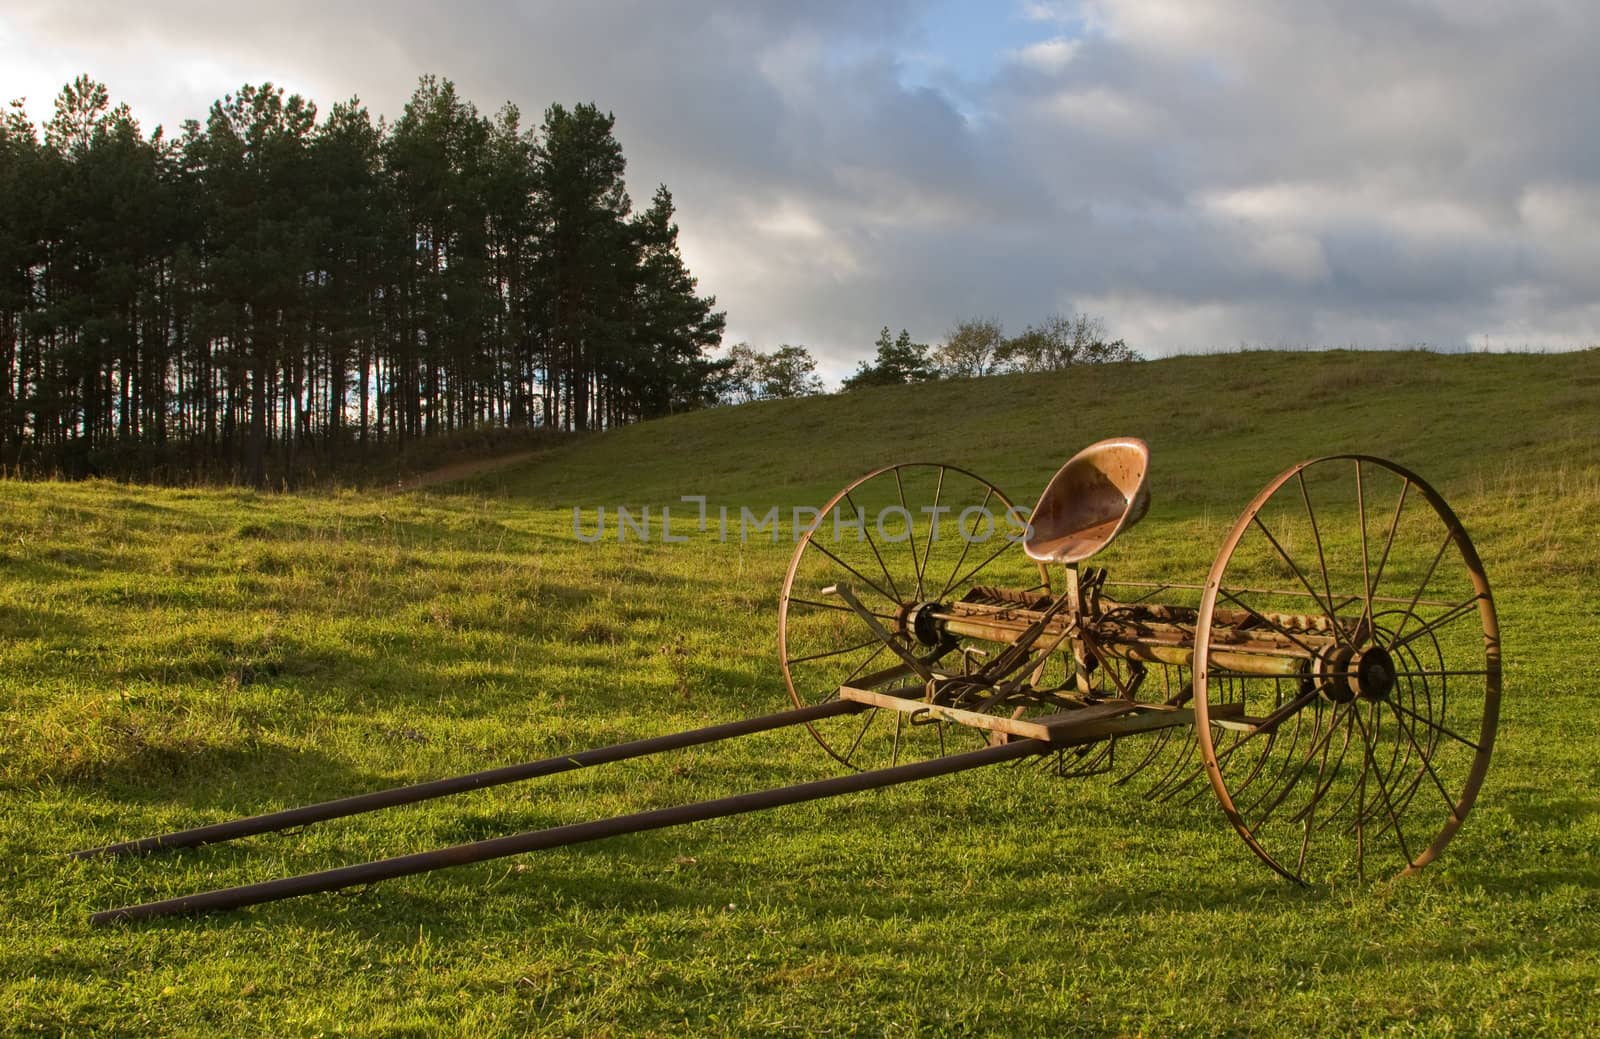 cart on the hill by desant7474